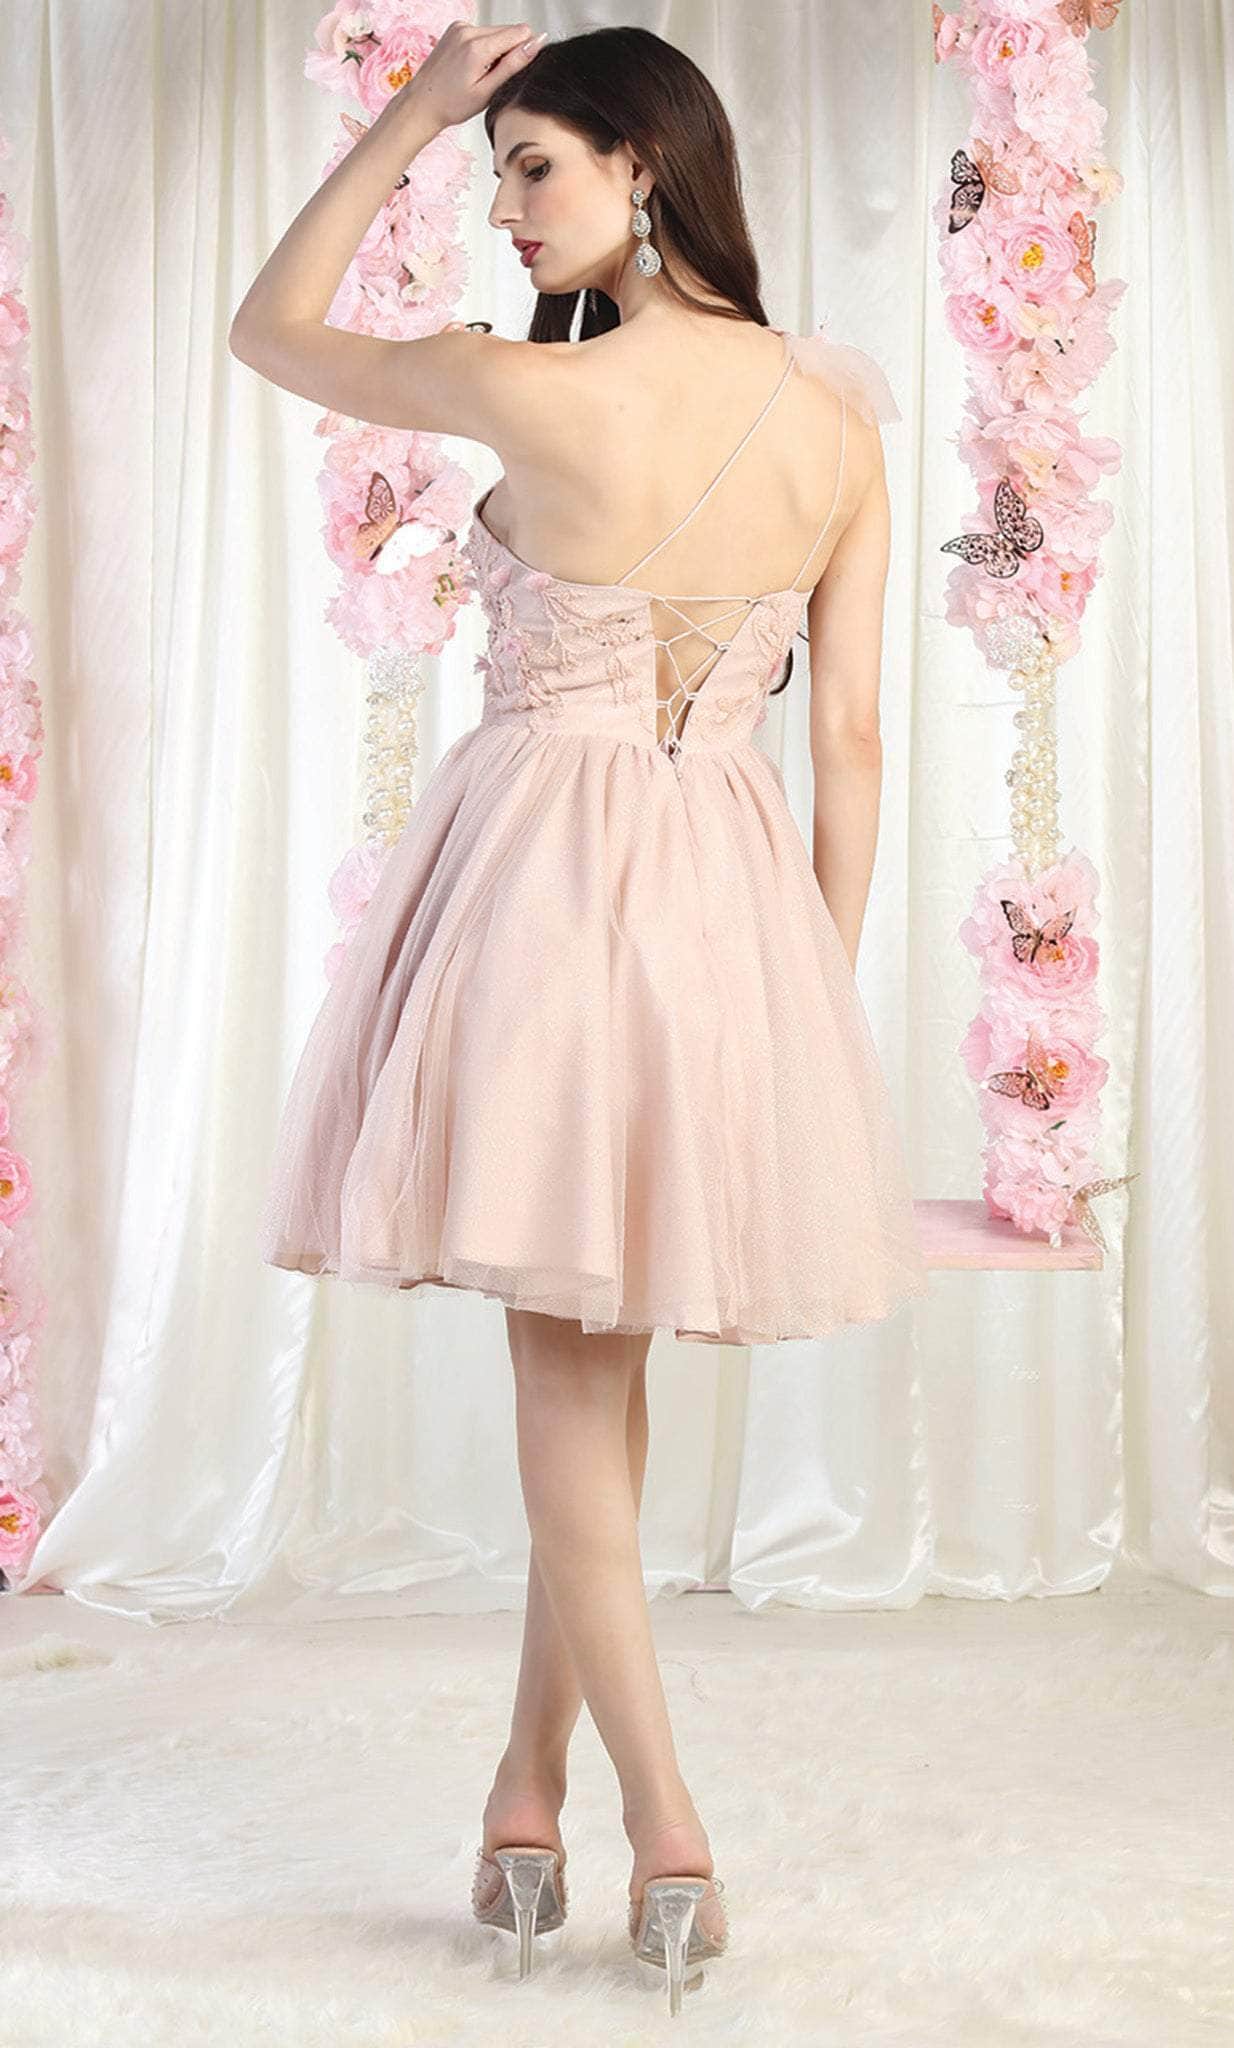 May Queen MQ1952 - One Shoulder A-Line Cocktail Dress Cocktail Dresses